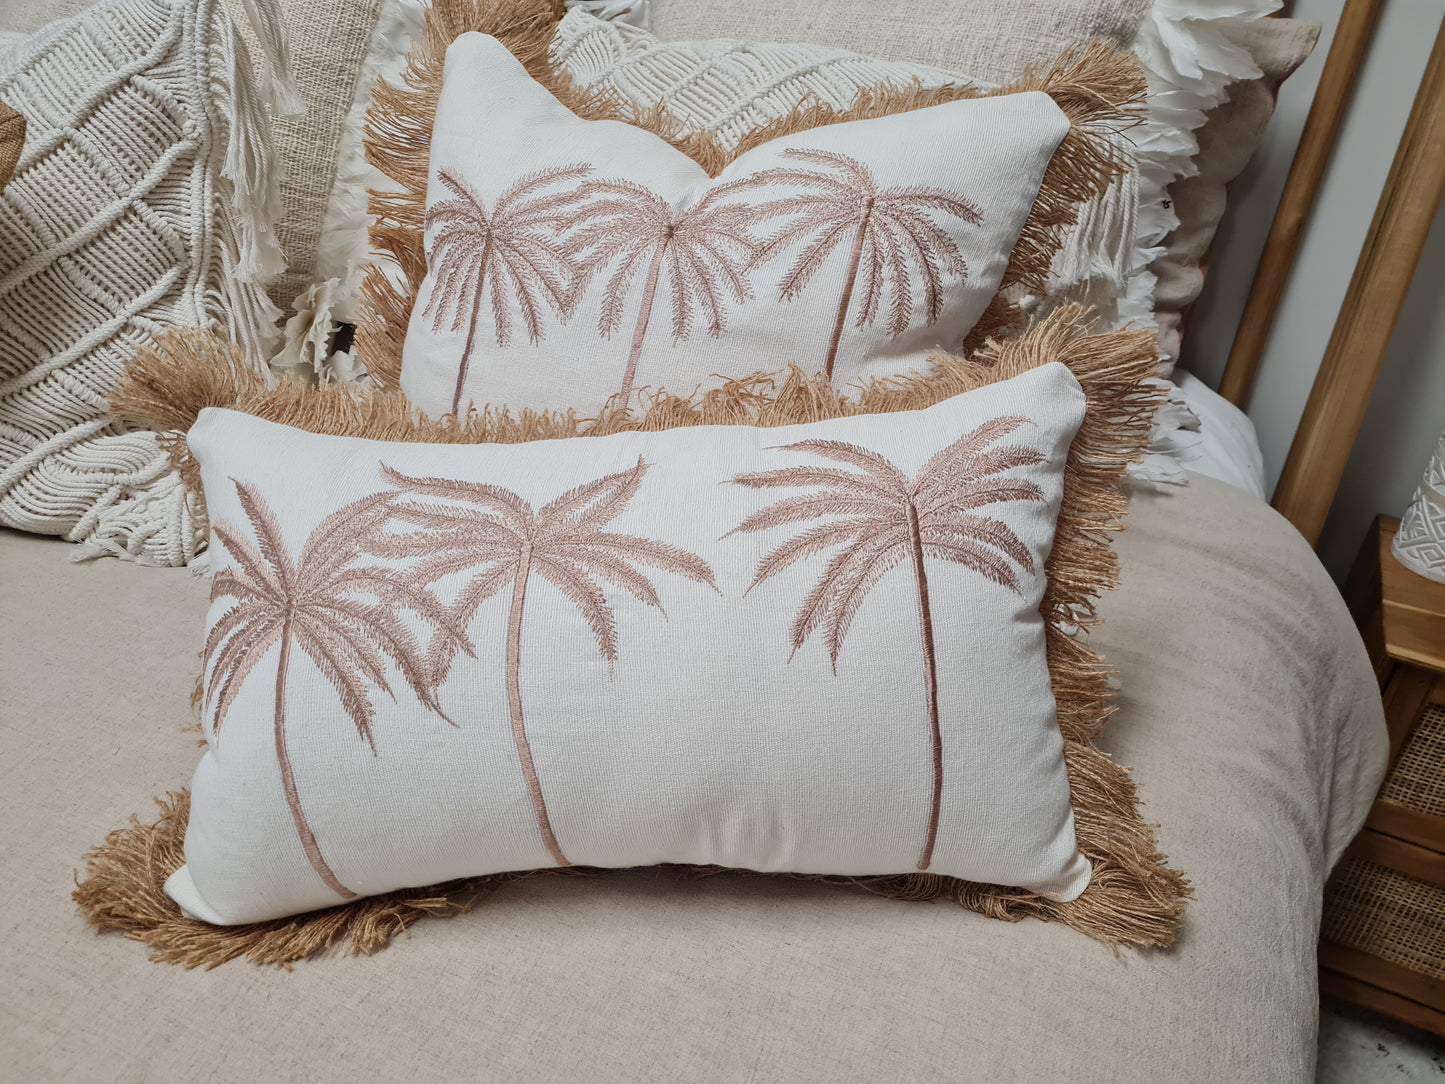 Cushion Cover 3 palm trees and fringe